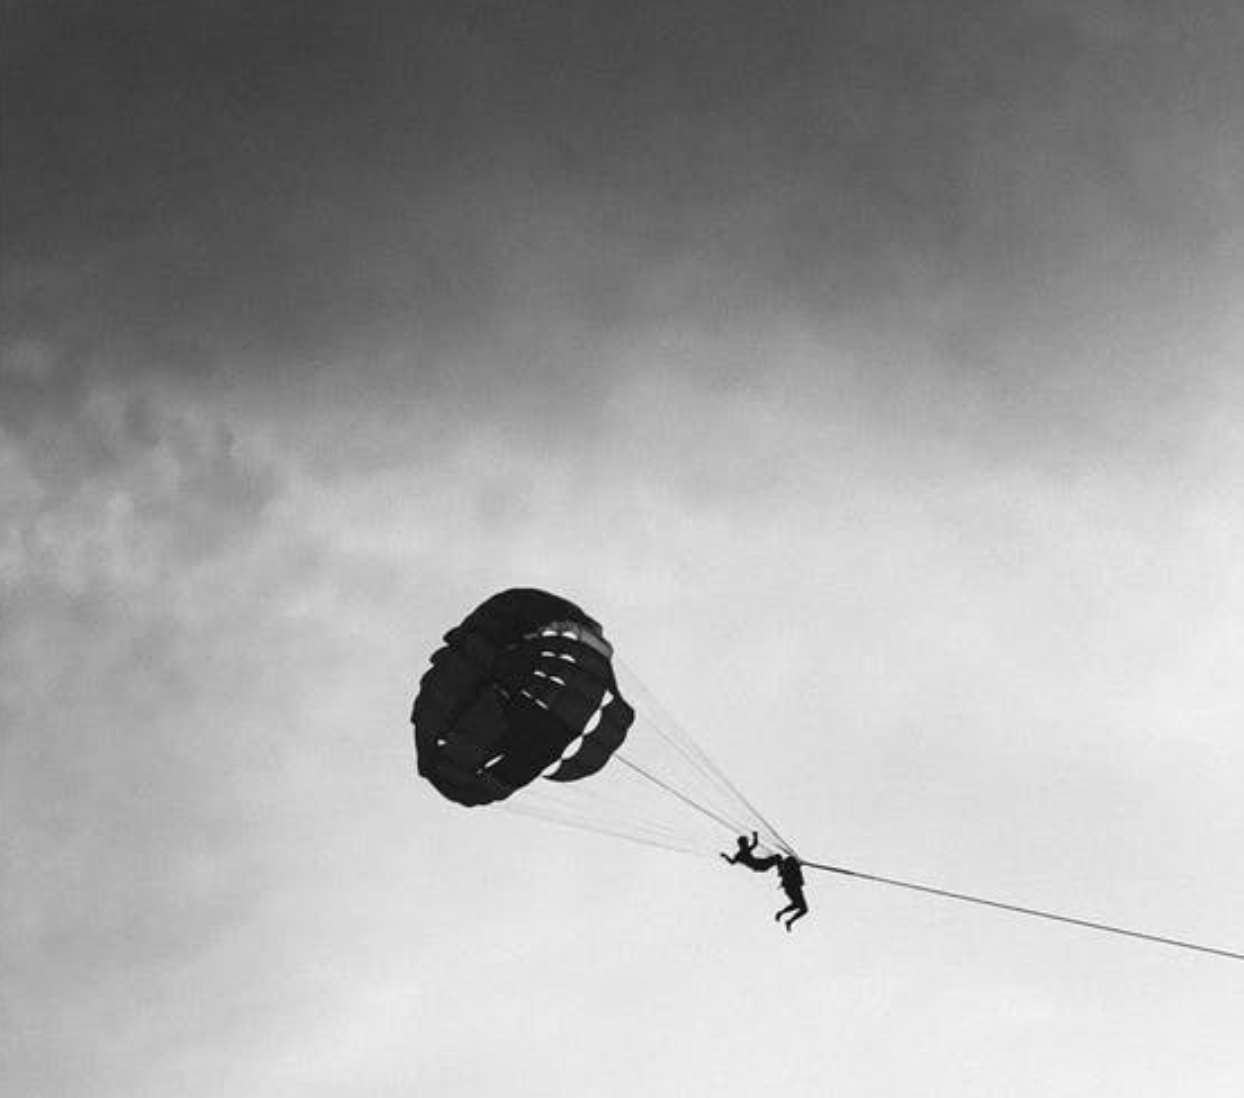 Parasailing in cloudy weather; image by Nitigya Soni, via Pexels.com.